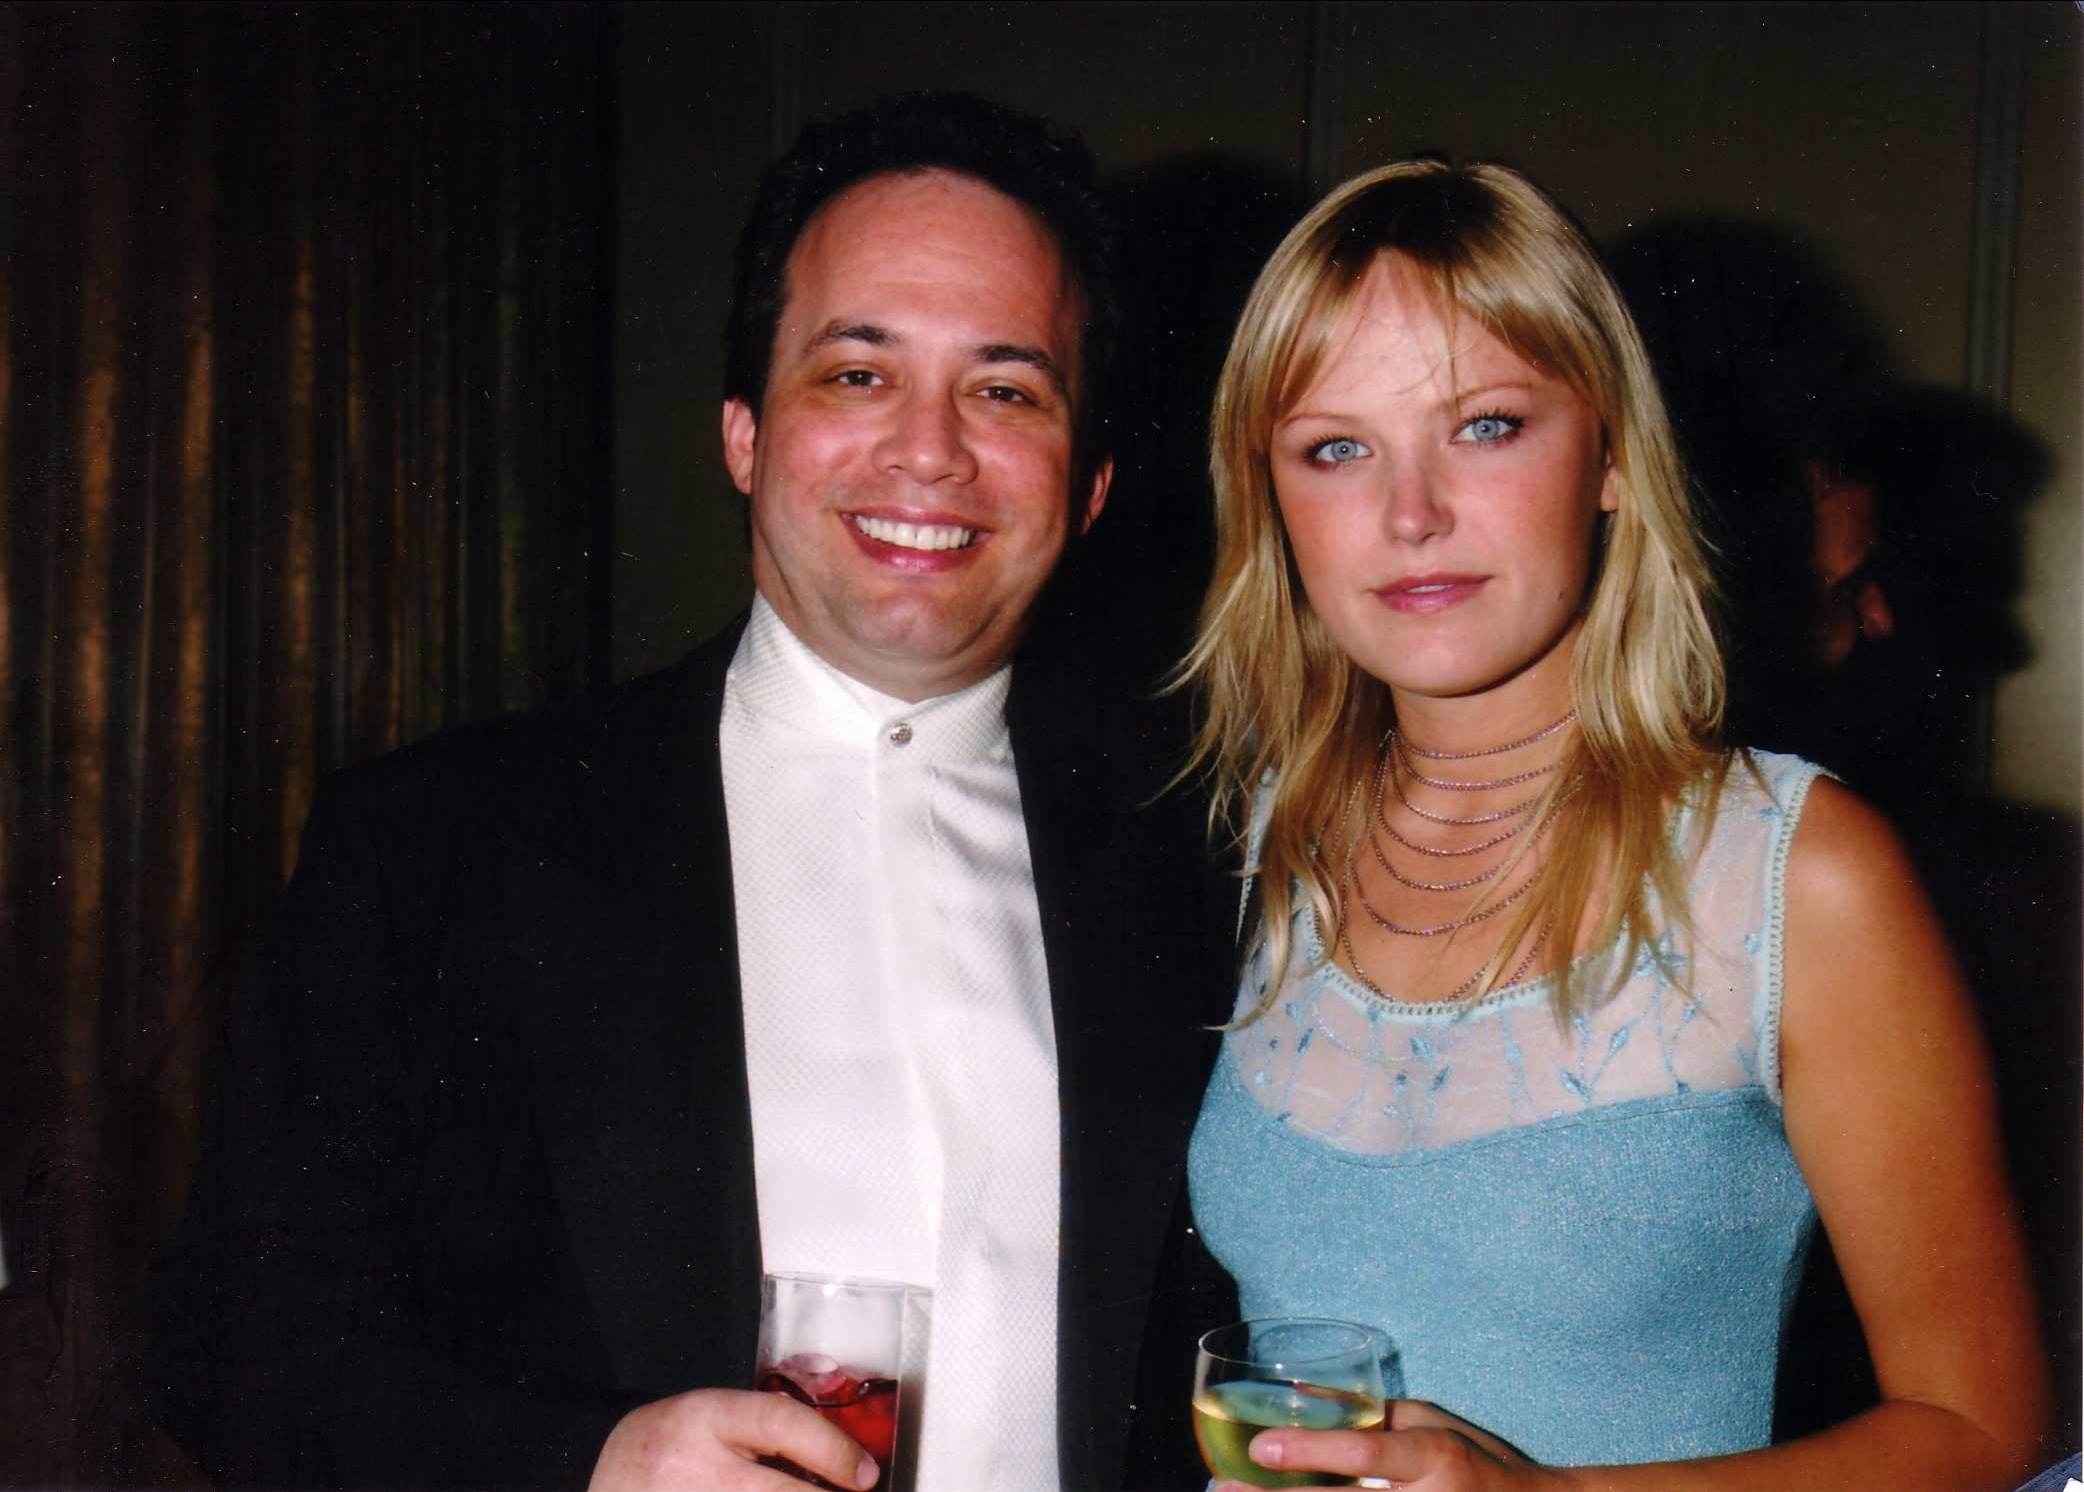 Michael Jay and Malin Akerman at the BMI Pop Awards in Beverly Hills.